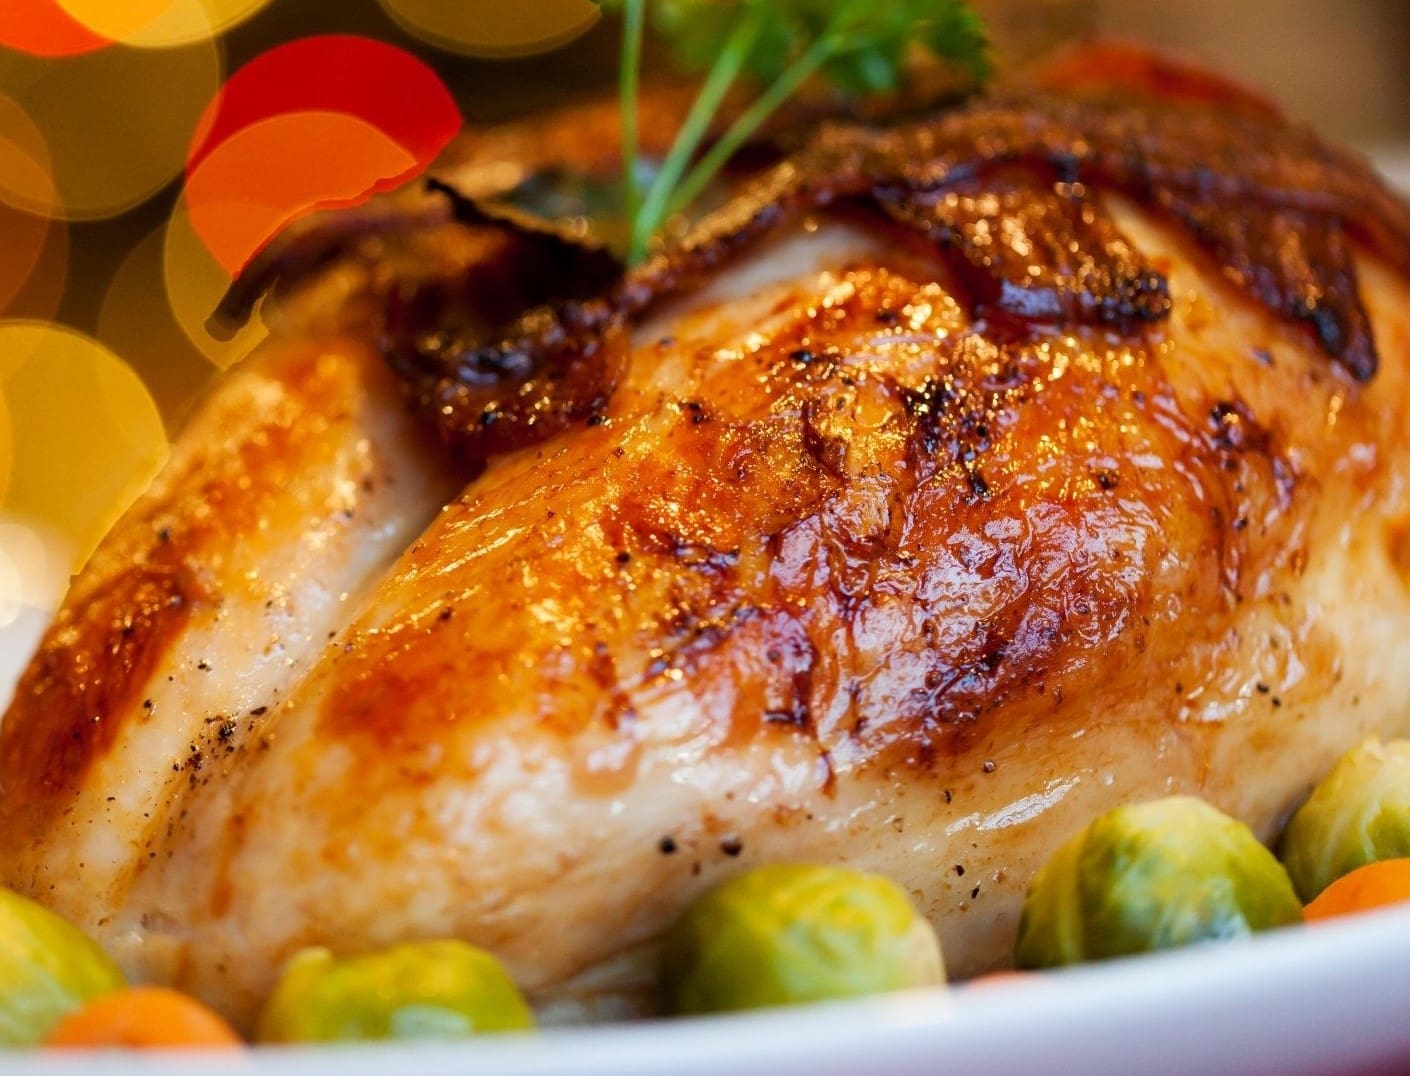 How To Defrost A Turkey For Christmas Day - All Things Christmas - Christmas.co.uk